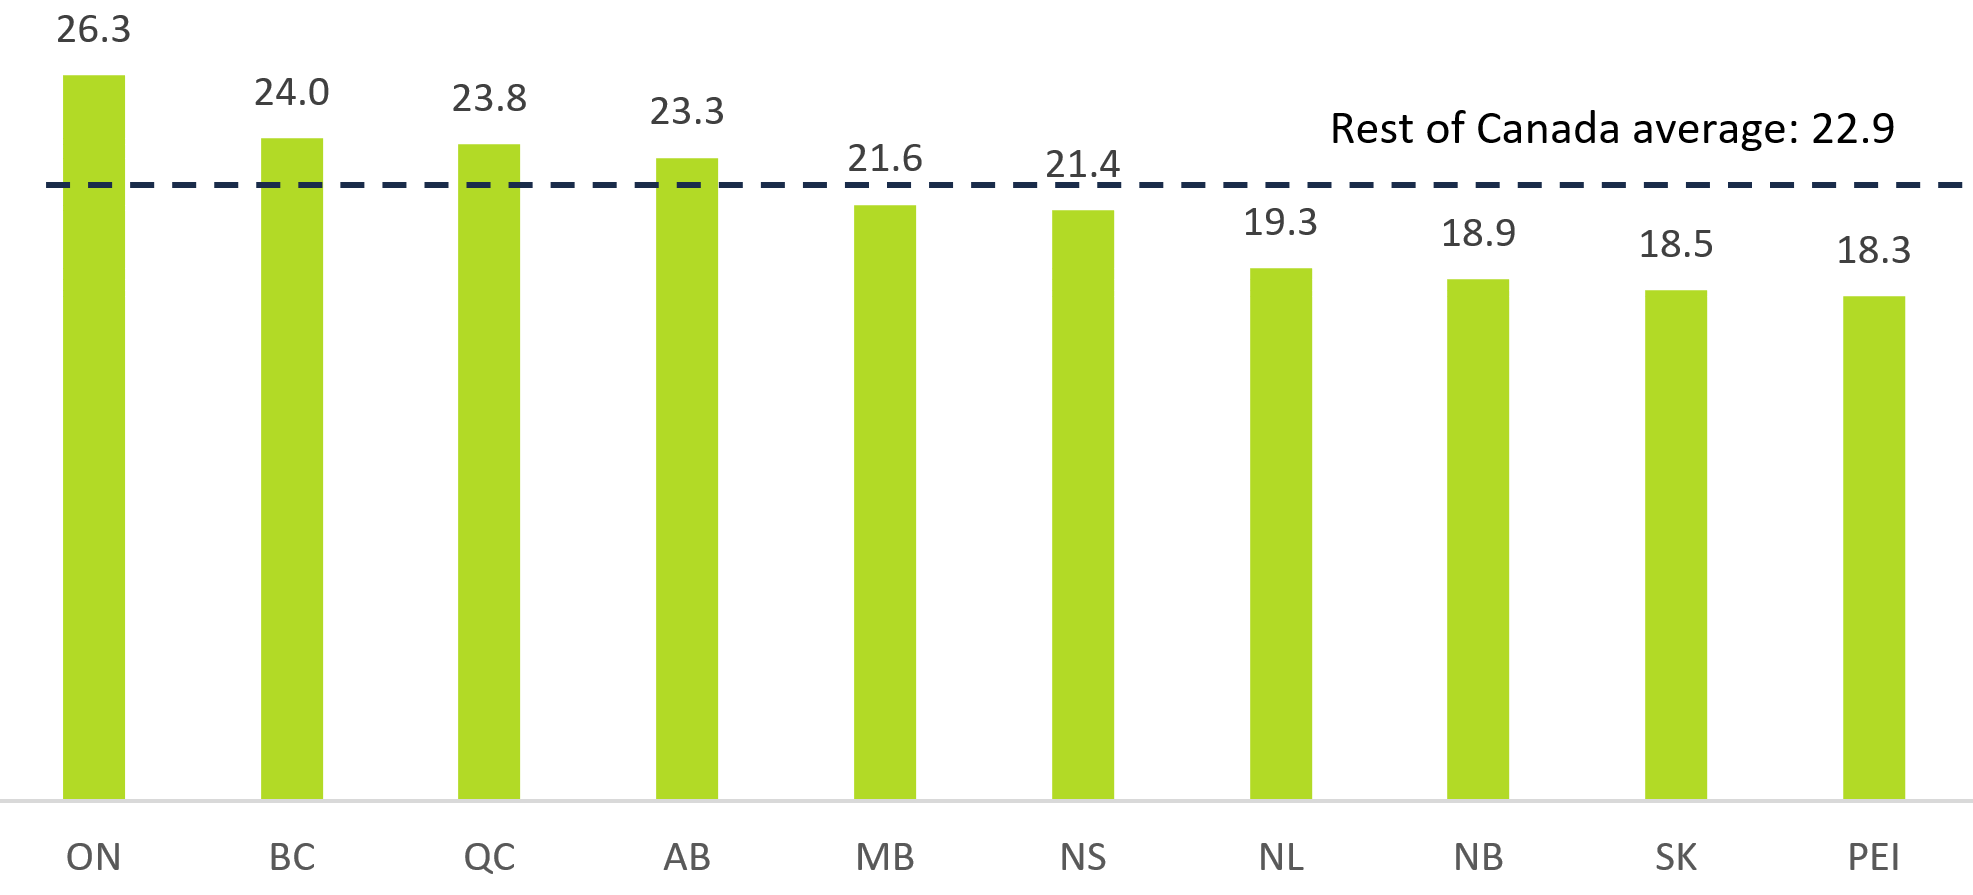 This chart shows the average commute times for drivers by province in 2016 in minutes. The chart shows that the average commute time to work for drivers in Ontario was 26.3 minutes, 24.0 minutes in British Columbia, 23.8 minutes in Quebec, 23.3 minutes in Alberta, 21.6 minutes in Manitoba, 21.4 minutes in Nova Scotia, 19.3 minutes in Newfoundland and Labrador, 18.9 minutes in New Brunswick, 18.5 minutes in Saskatchewan and 18.3 minutes in Prince Edward Island. This chart highlights that the average commute time to work for drivers across Canada excluding Ontario was 22.9 minutes.